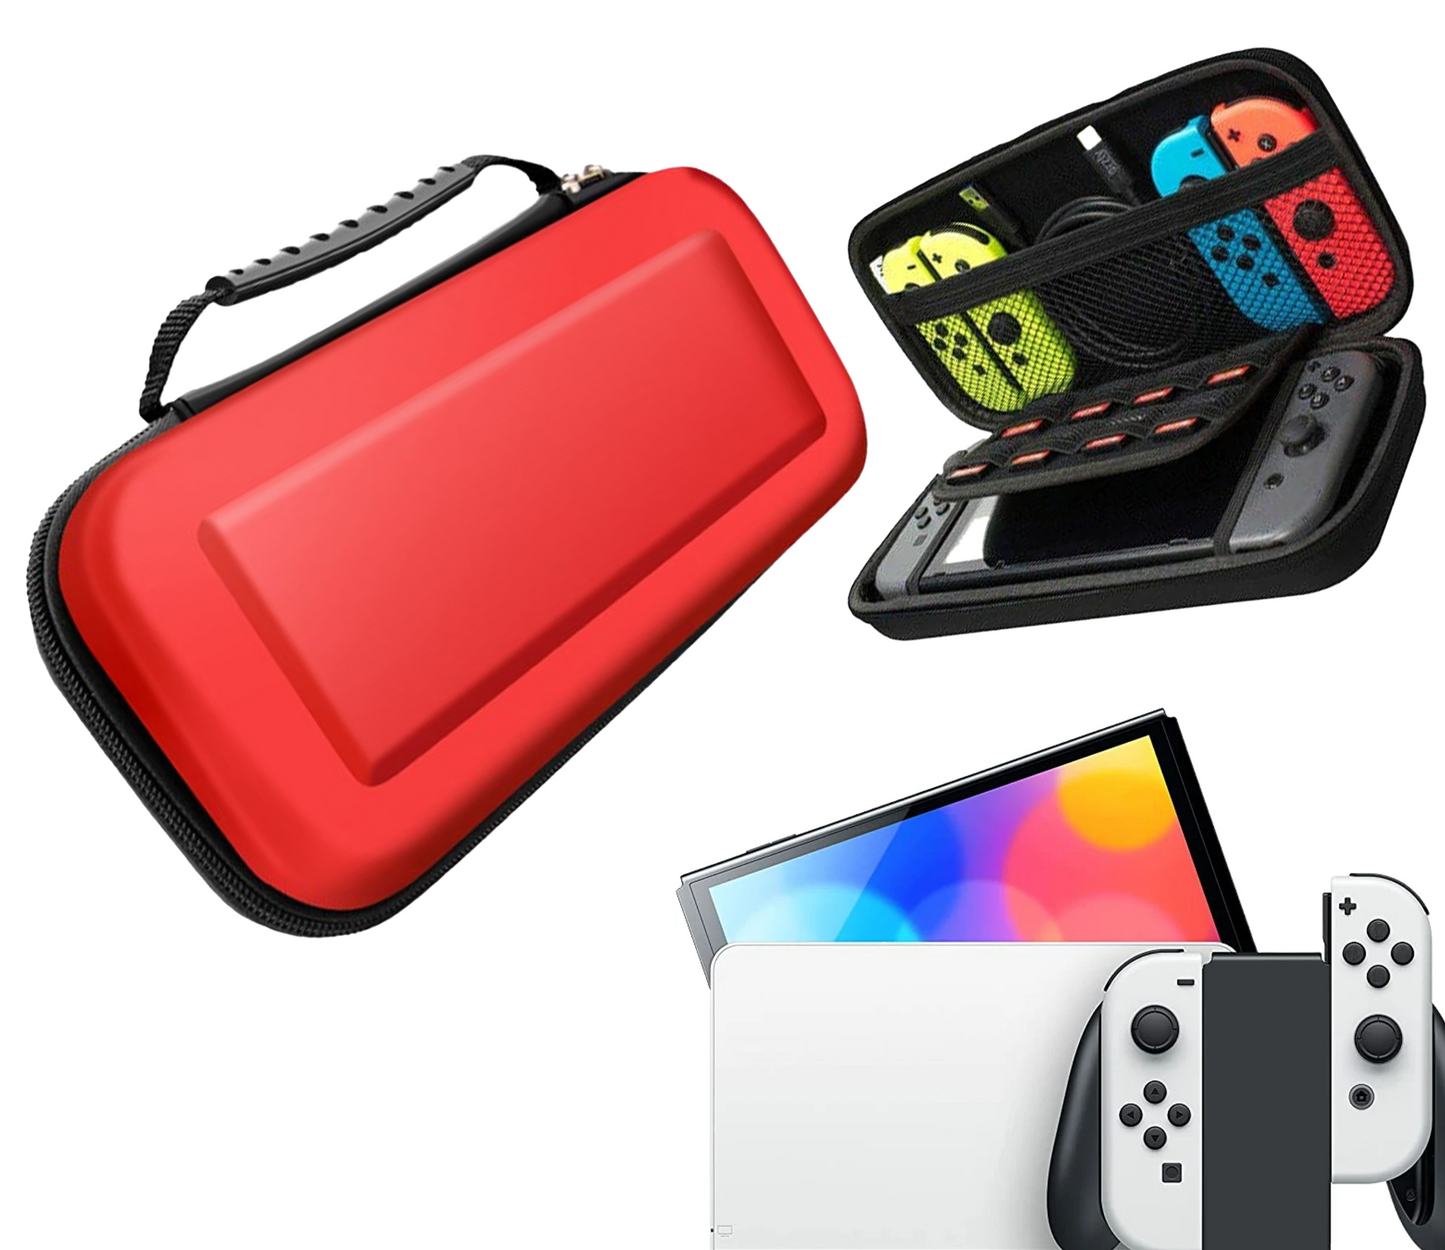 Protective cover | Hardcase Storage Cover | Case | Red | Accessories suitable for Nintendo Switch